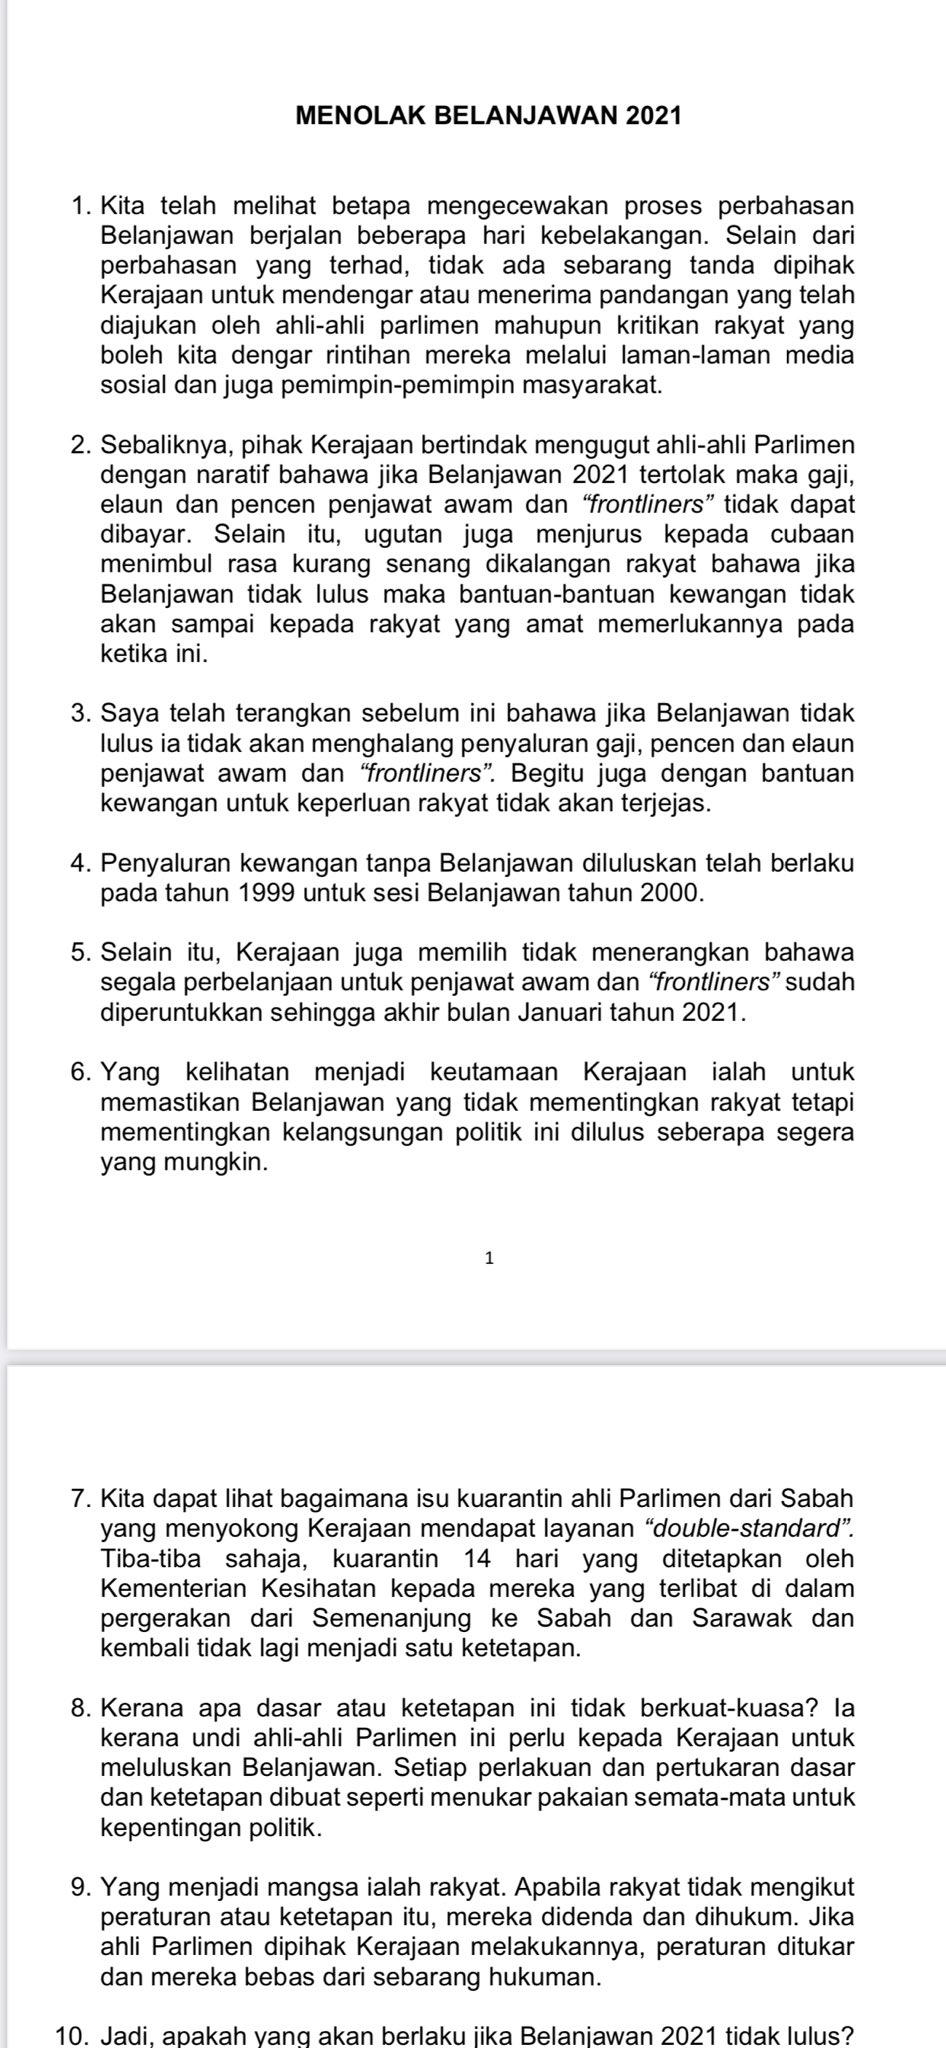 Melissa Goh On Twitter Dr Mahathir Co To Reject Budget2021 At Tmrw S Vote In Parliament While Snap Poll Isn T Possible The King He Said Could Appoint A New Leader Who Can